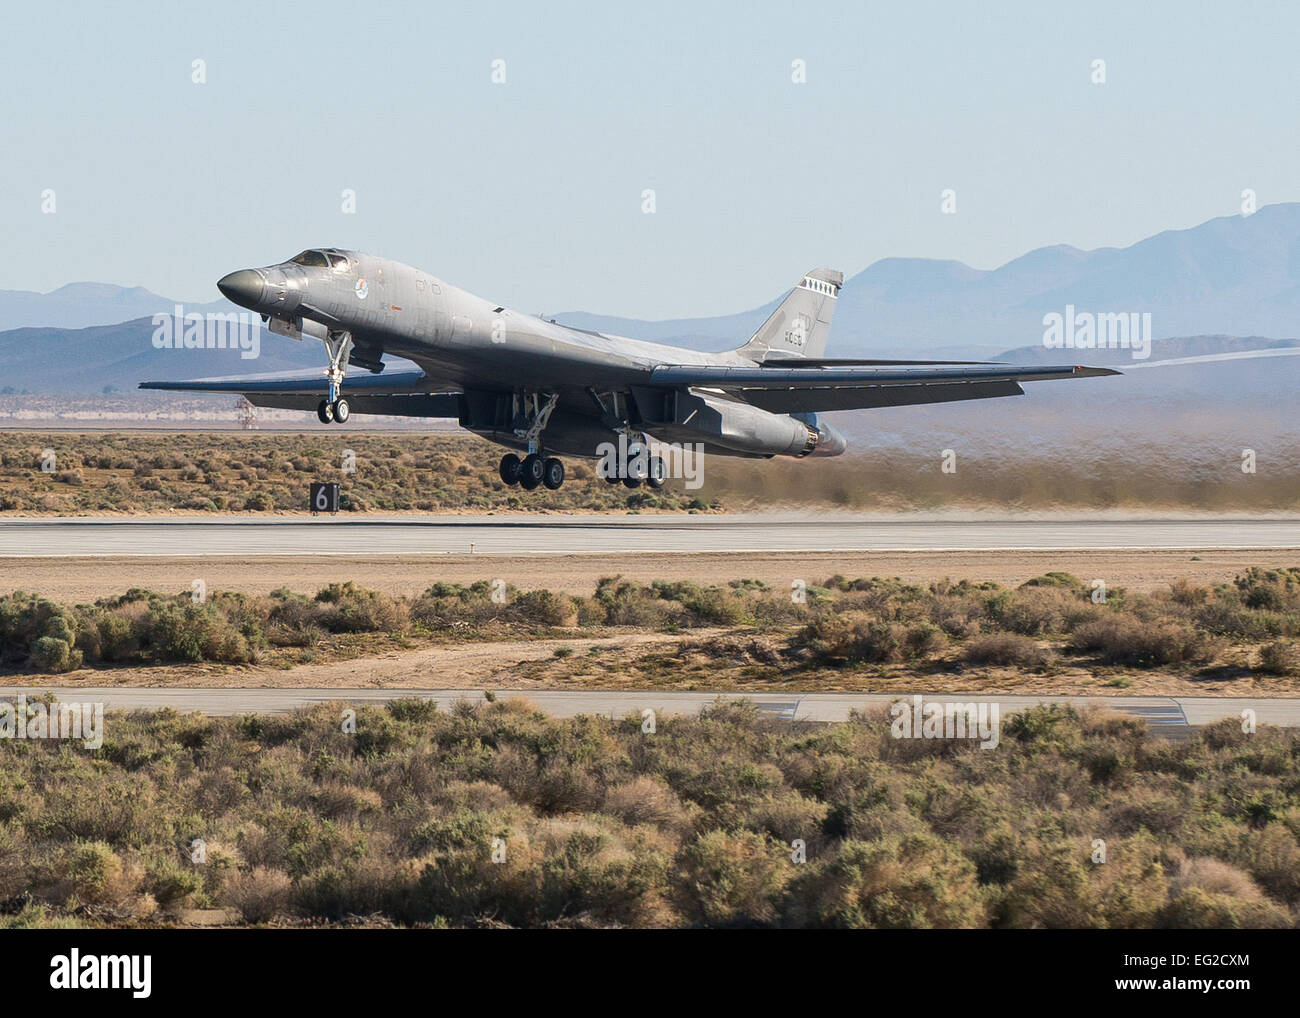 An Edwards B-1B Lancer takes off Runway 22L on April 1, 2014, to begin testing its Sustainment Block 16A software upgrades. The SB 16A software will work in conjunction with the long-range bomber’s new glass cockpit configuration in order to ensure its capabilities in a fast-paced integrated battlefield of the future.  Ethan Wagner Stock Photo